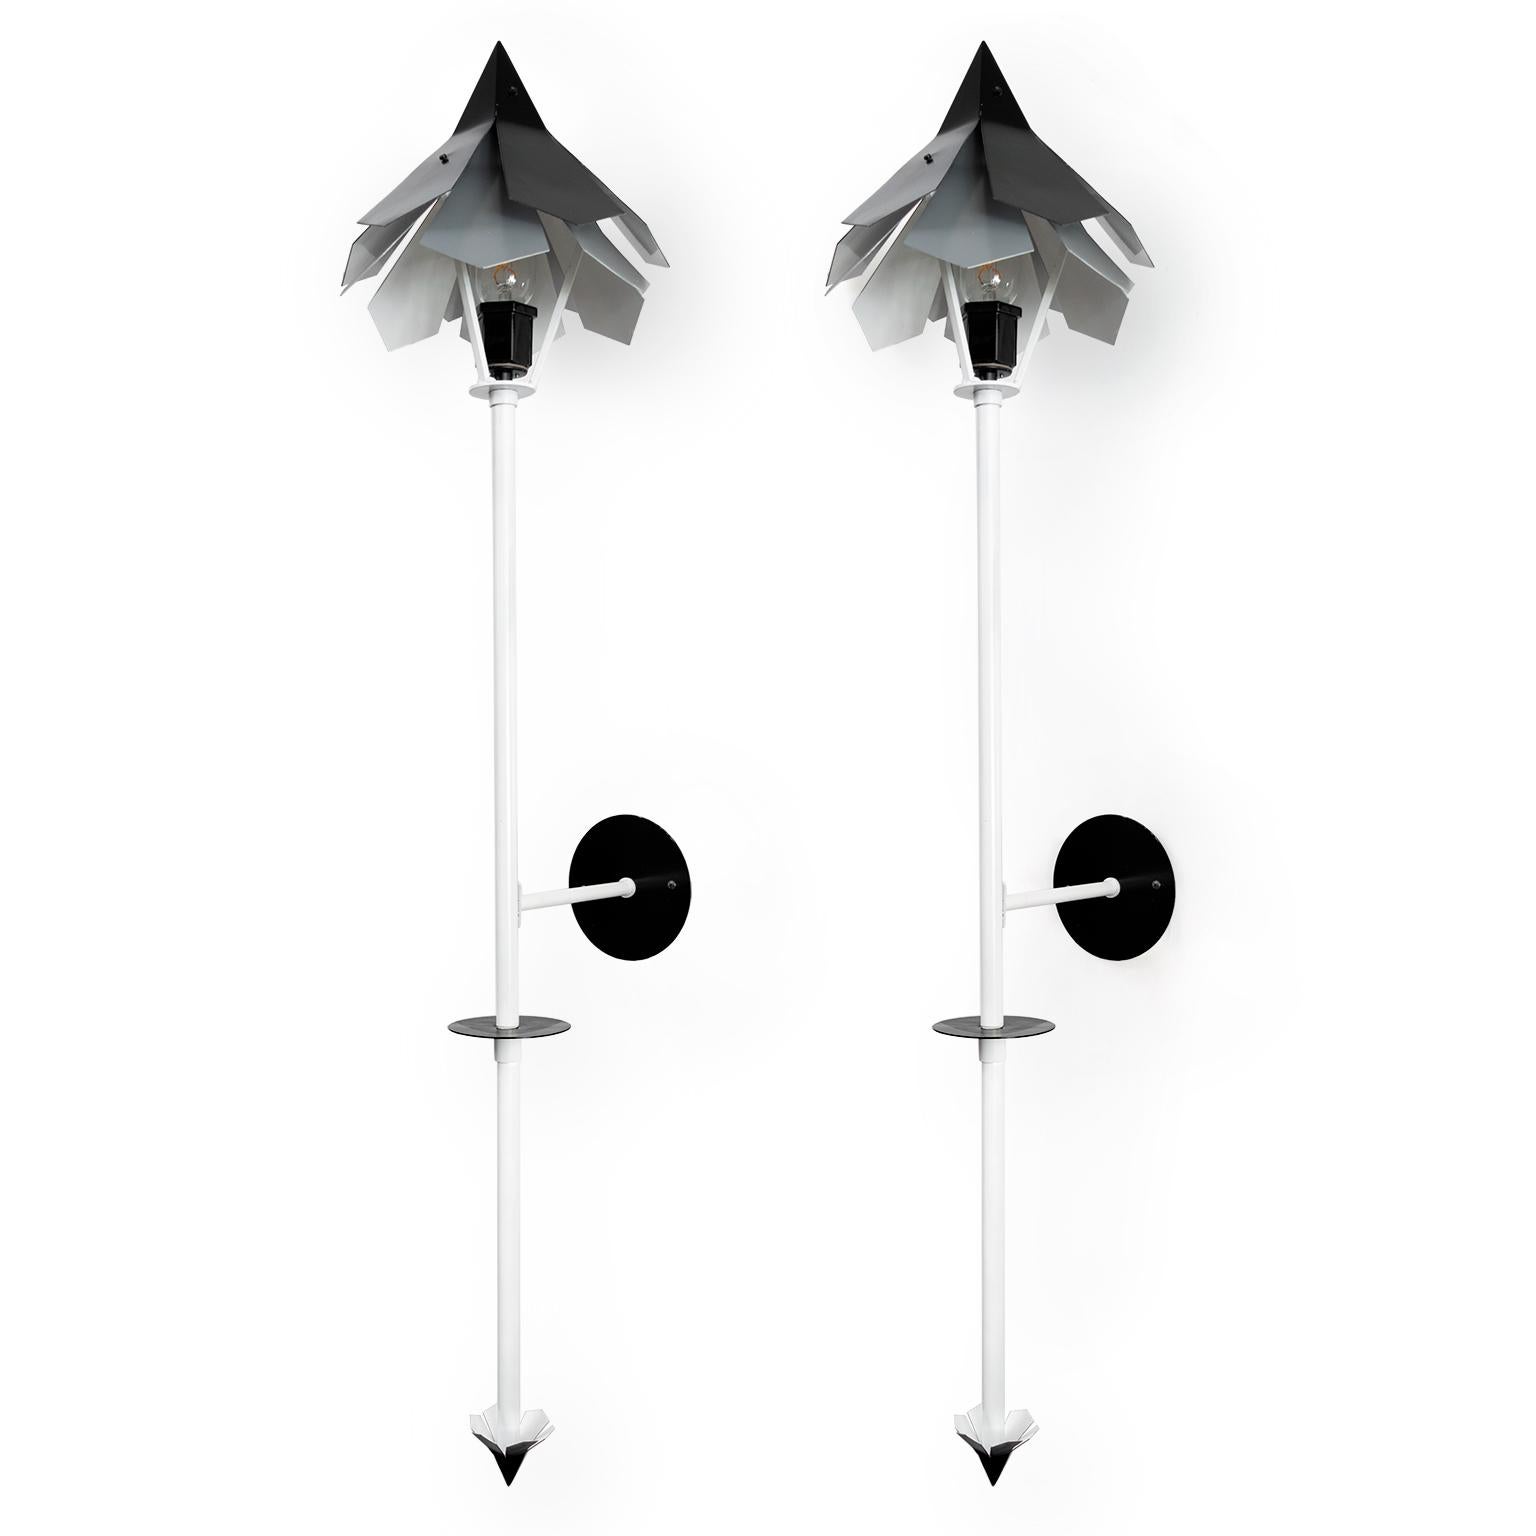 A pair torch lamps designed by Simon Henningsen (son of Poul) for the Tivoli Gardens (1962) in Copenhagen, Denmark. These lamps have been adapted into wall-mounted lamps, newly painted and wired for use in the USA with a single porcelain Edison base